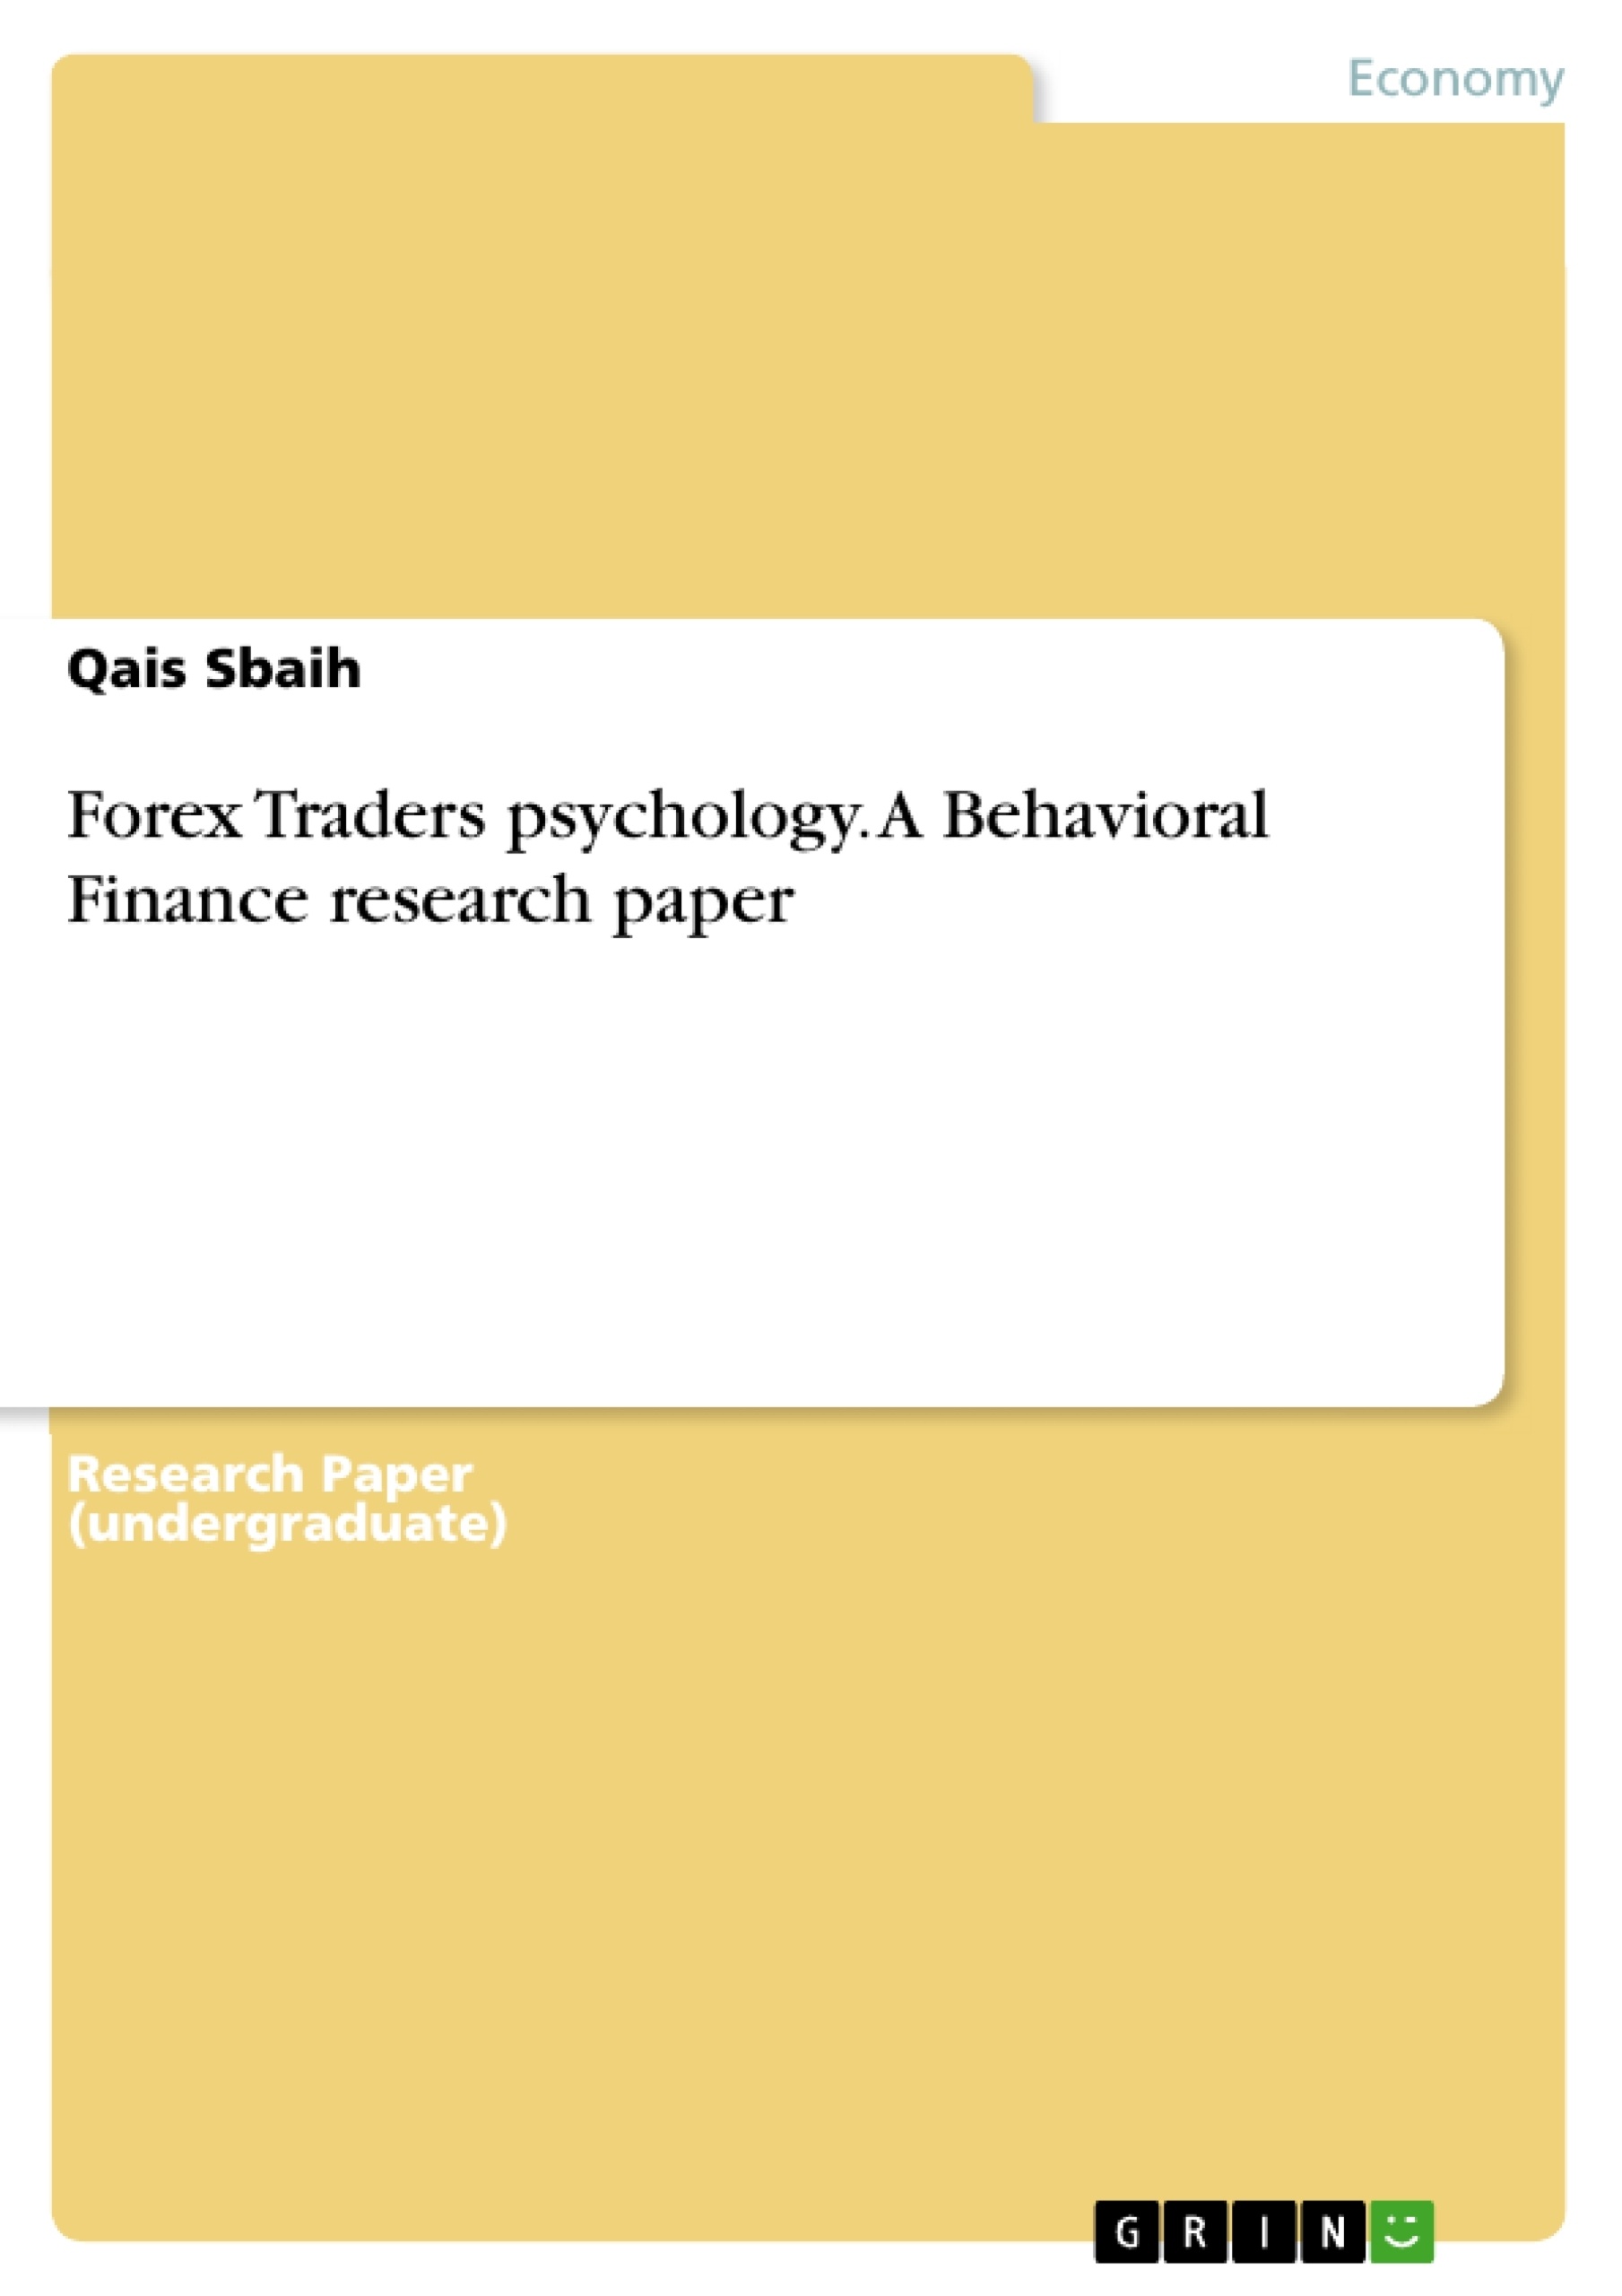 Title: Forex Traders psychology. A Behavioral Finance research paper